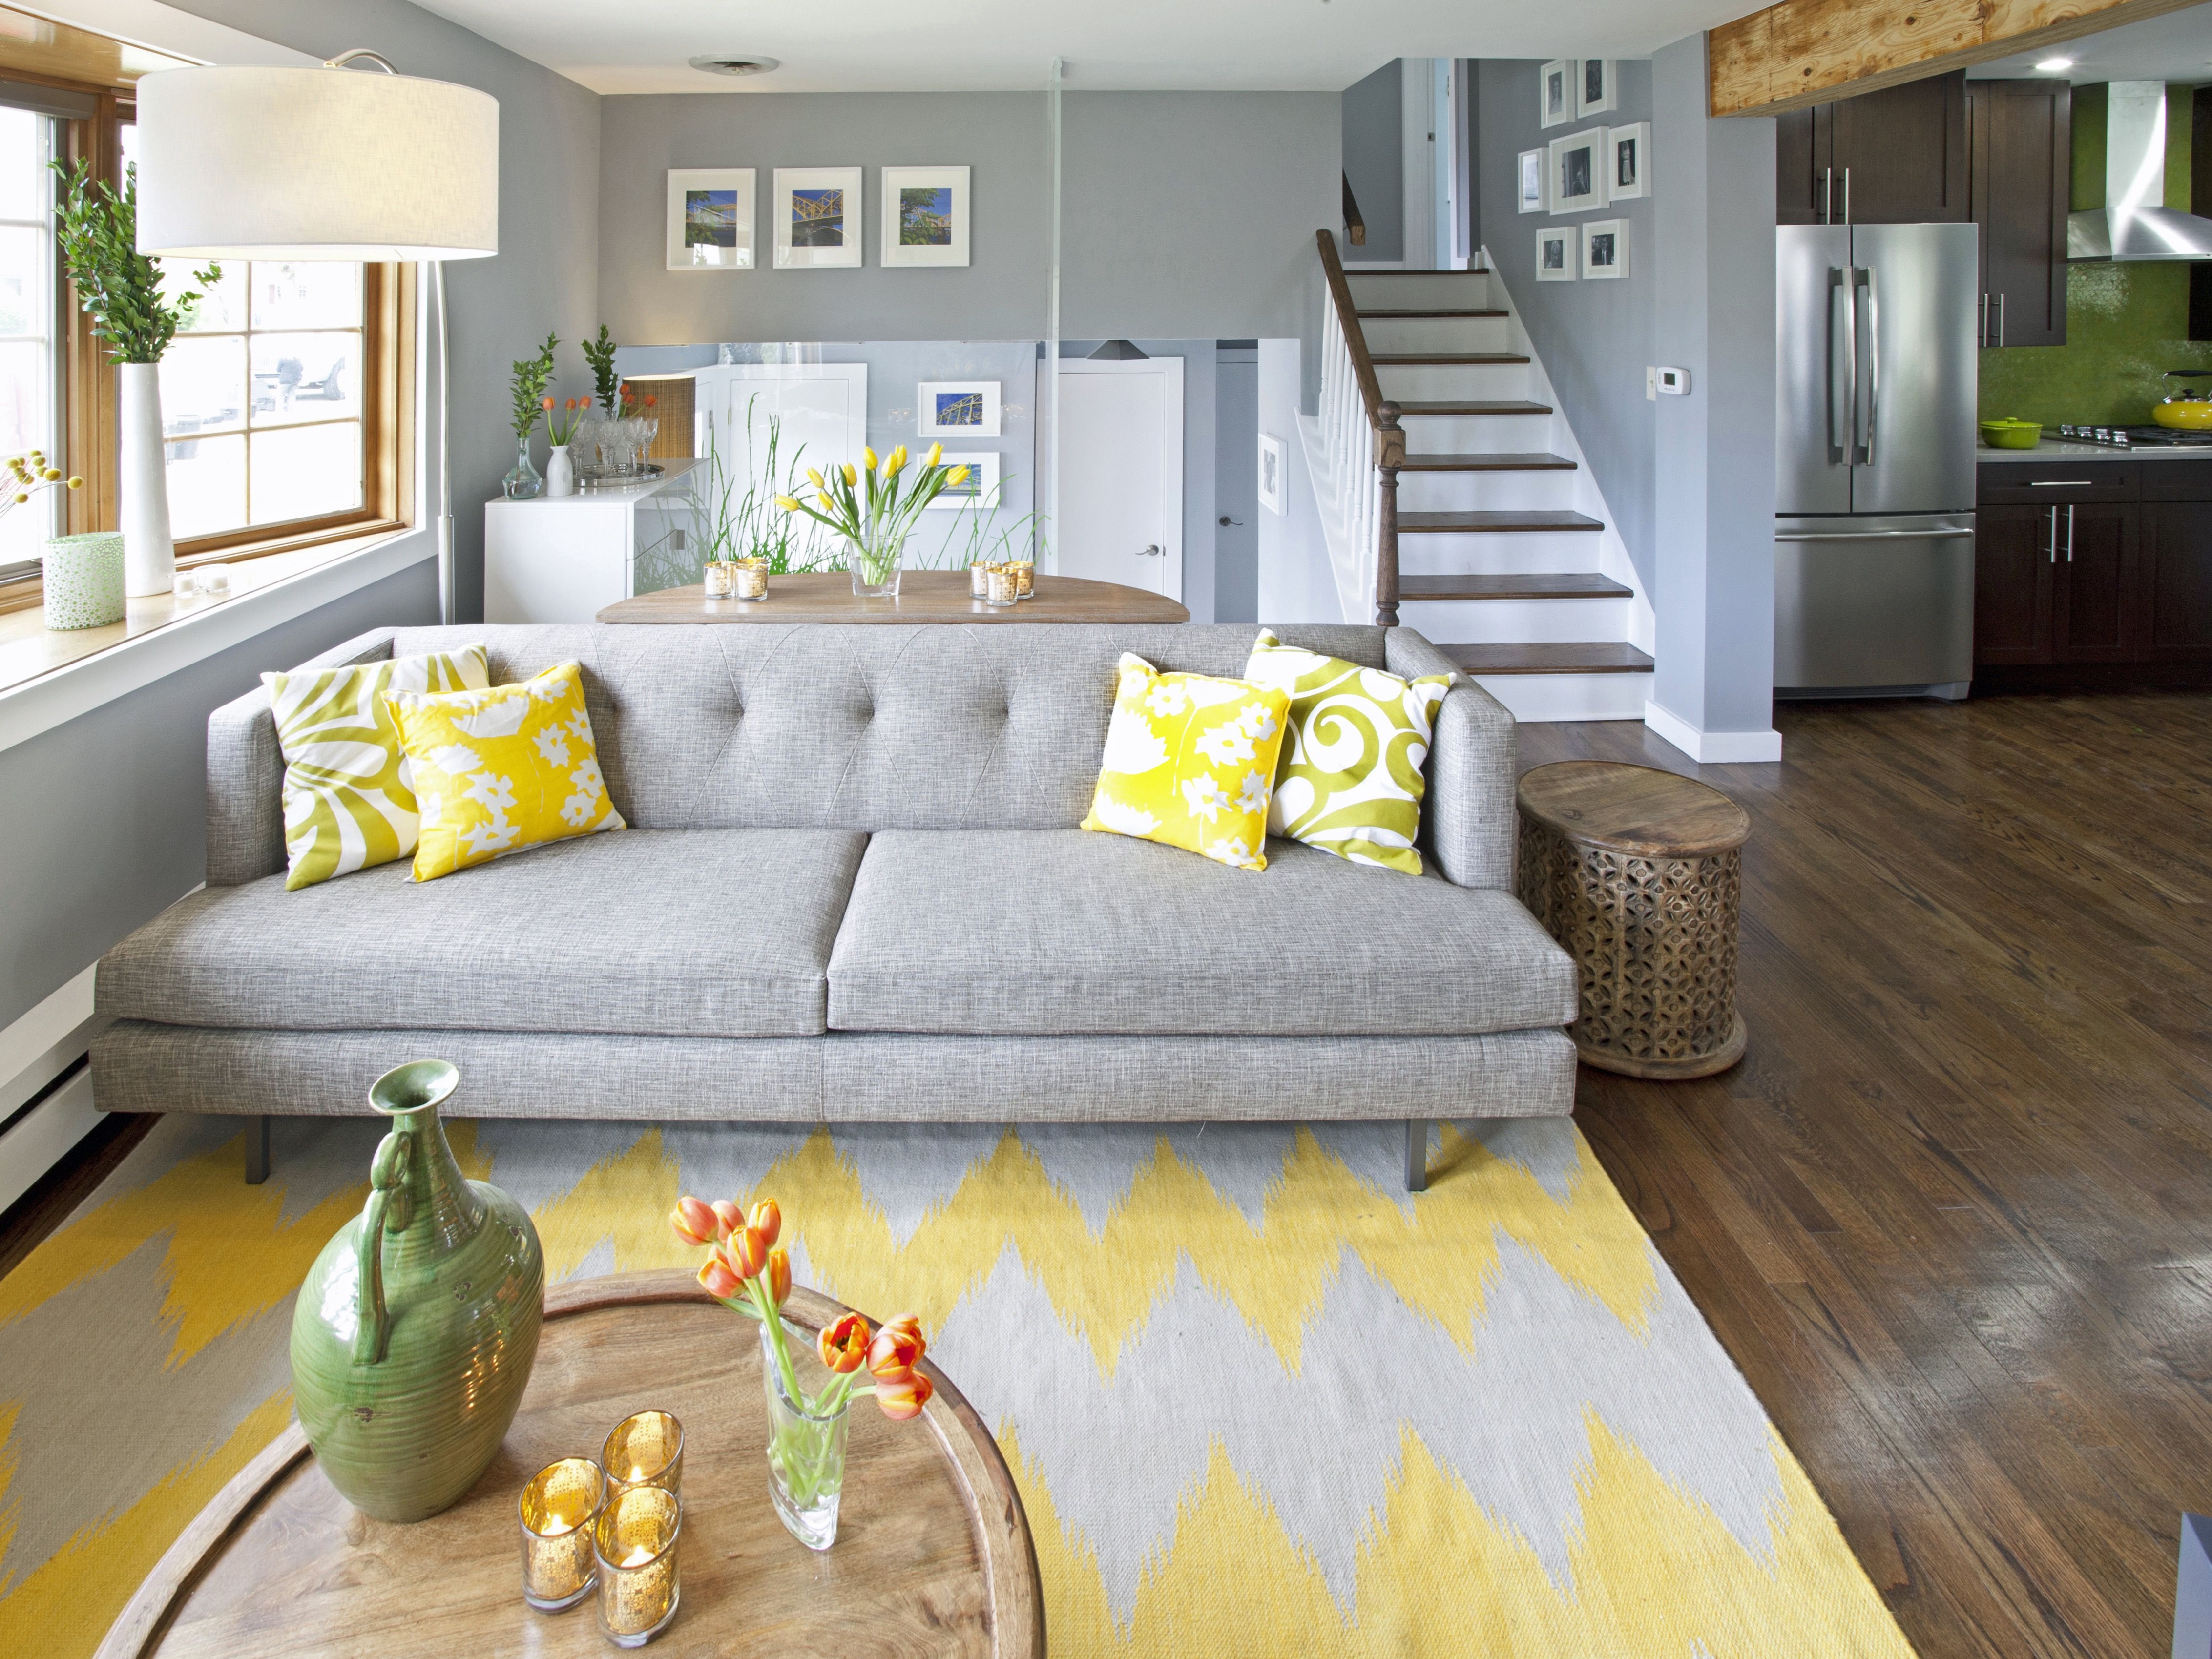 Chic Gray Tufted Sofa And Bright Yellow Throw Pillows (View 3 of 28)